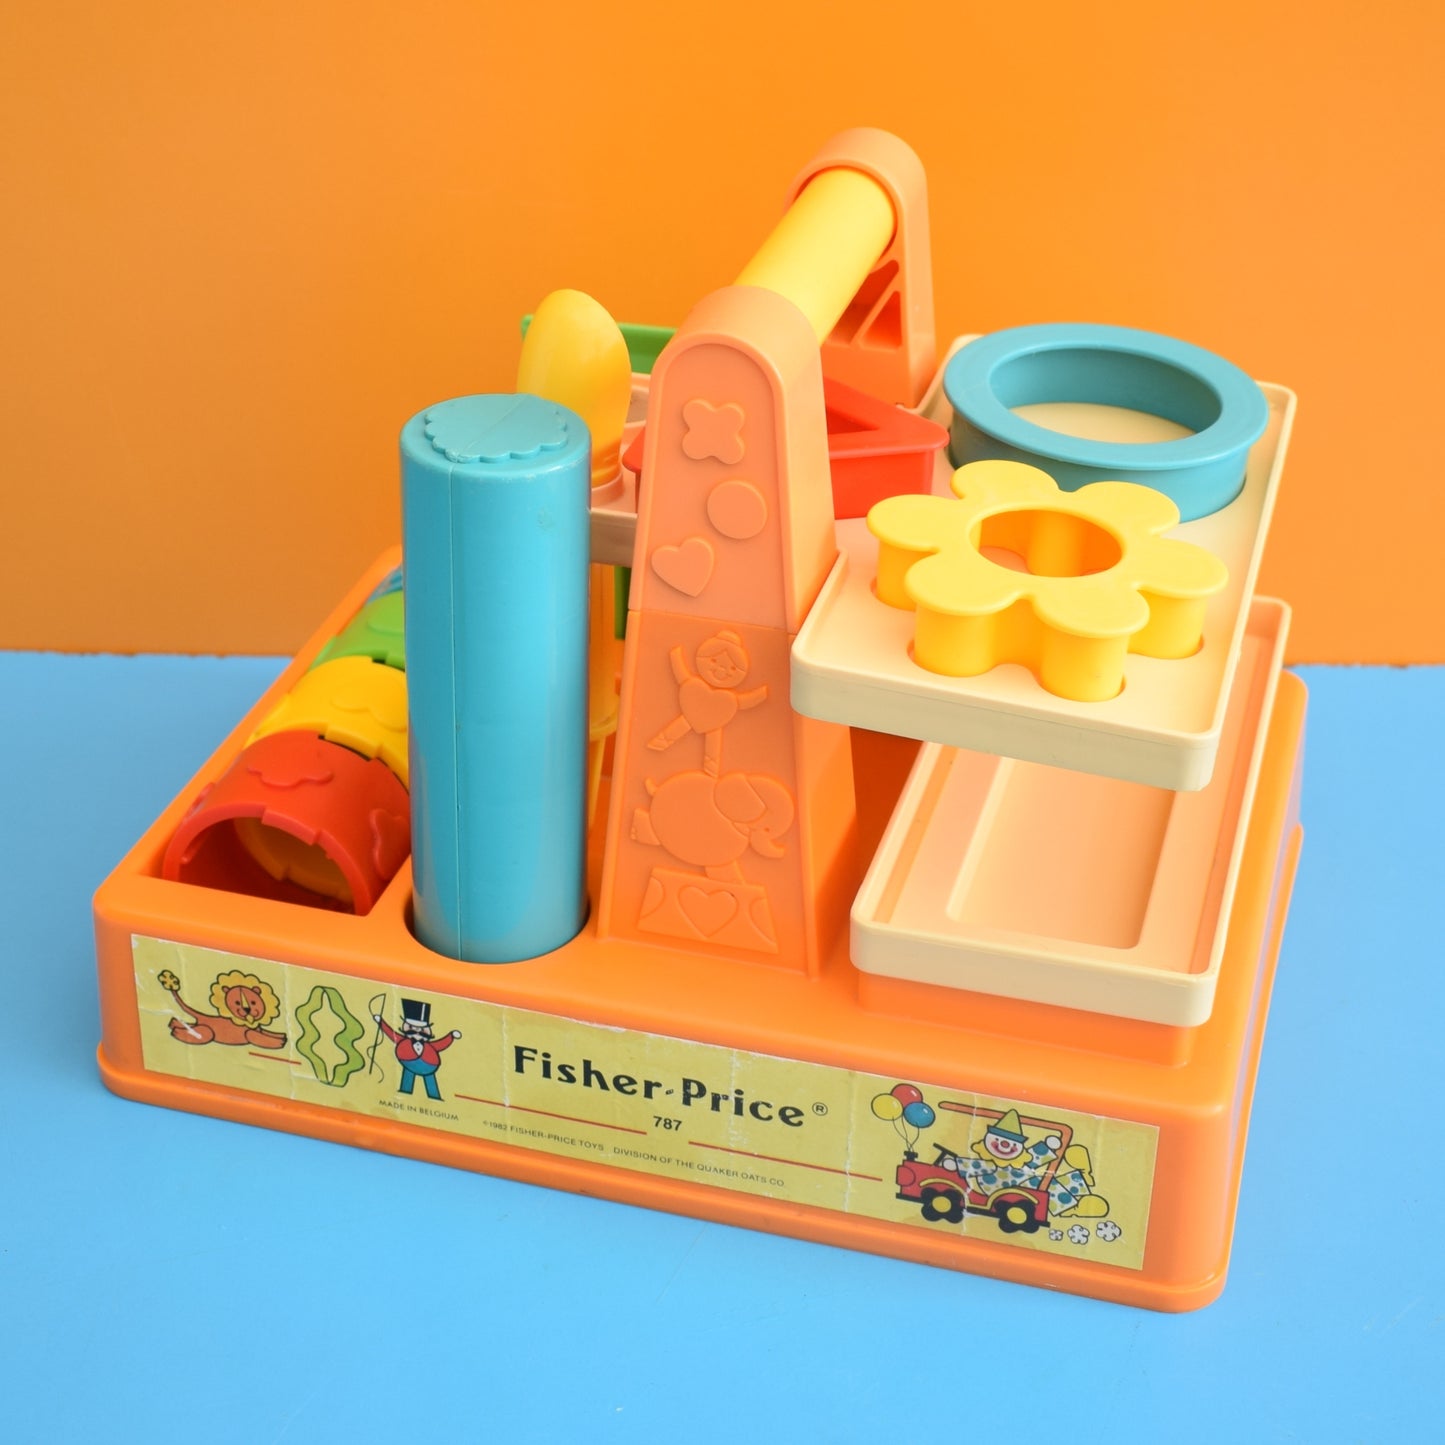 Vintage 1980s Fisher Price Play Modeling Set